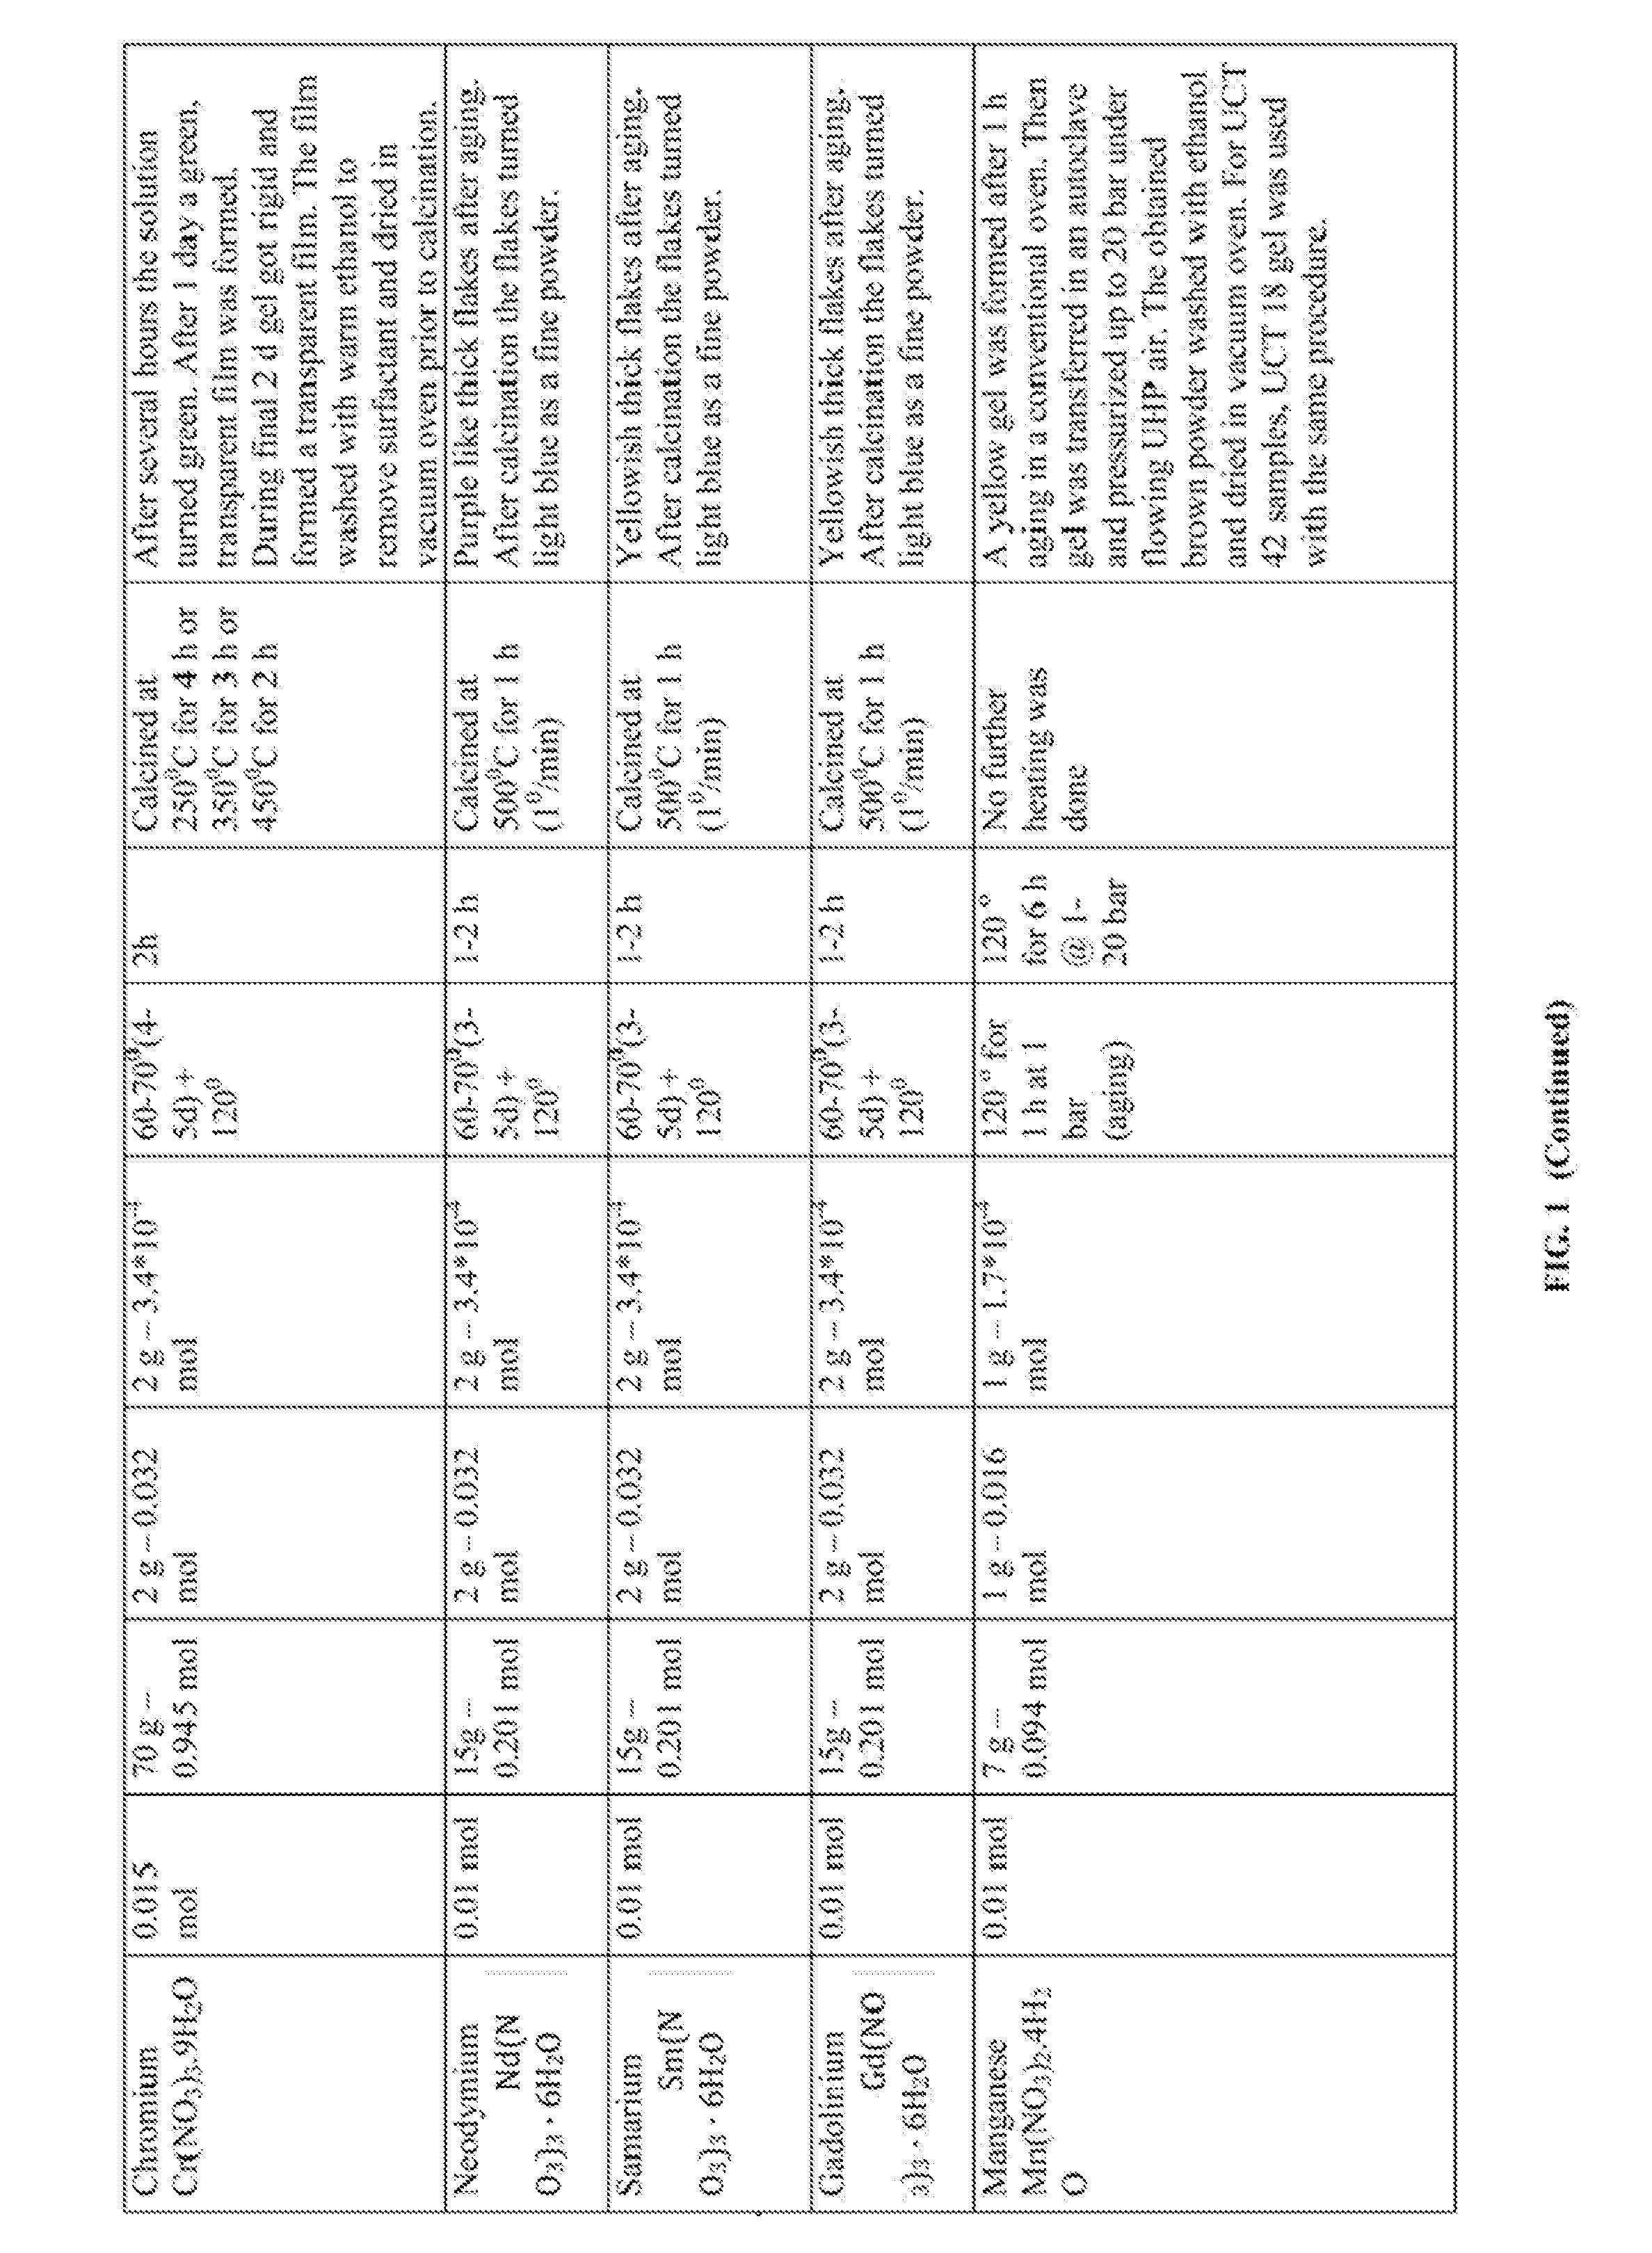 Mesoporous materials and processes for preparation thereof